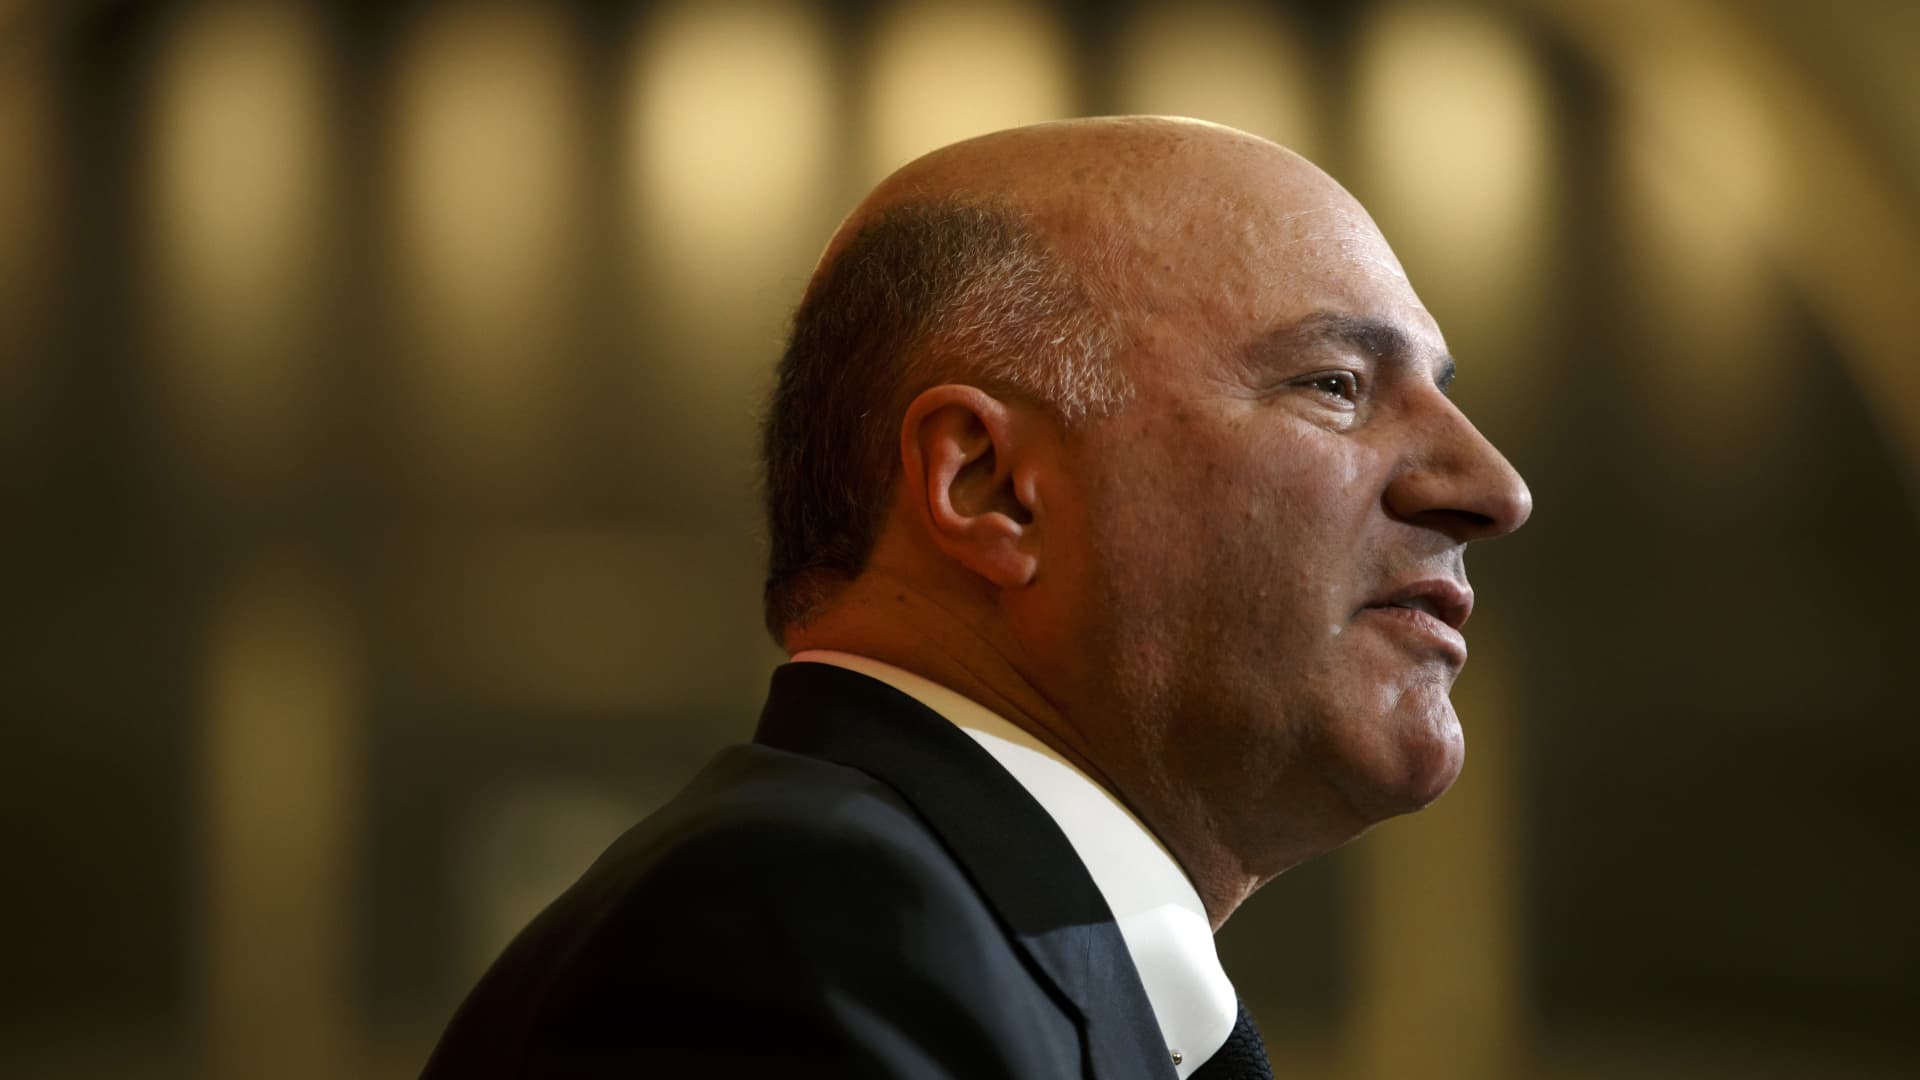 Kevin O’Leary on being dyslexic, where he got his financial chops and why he isn’t really that mean